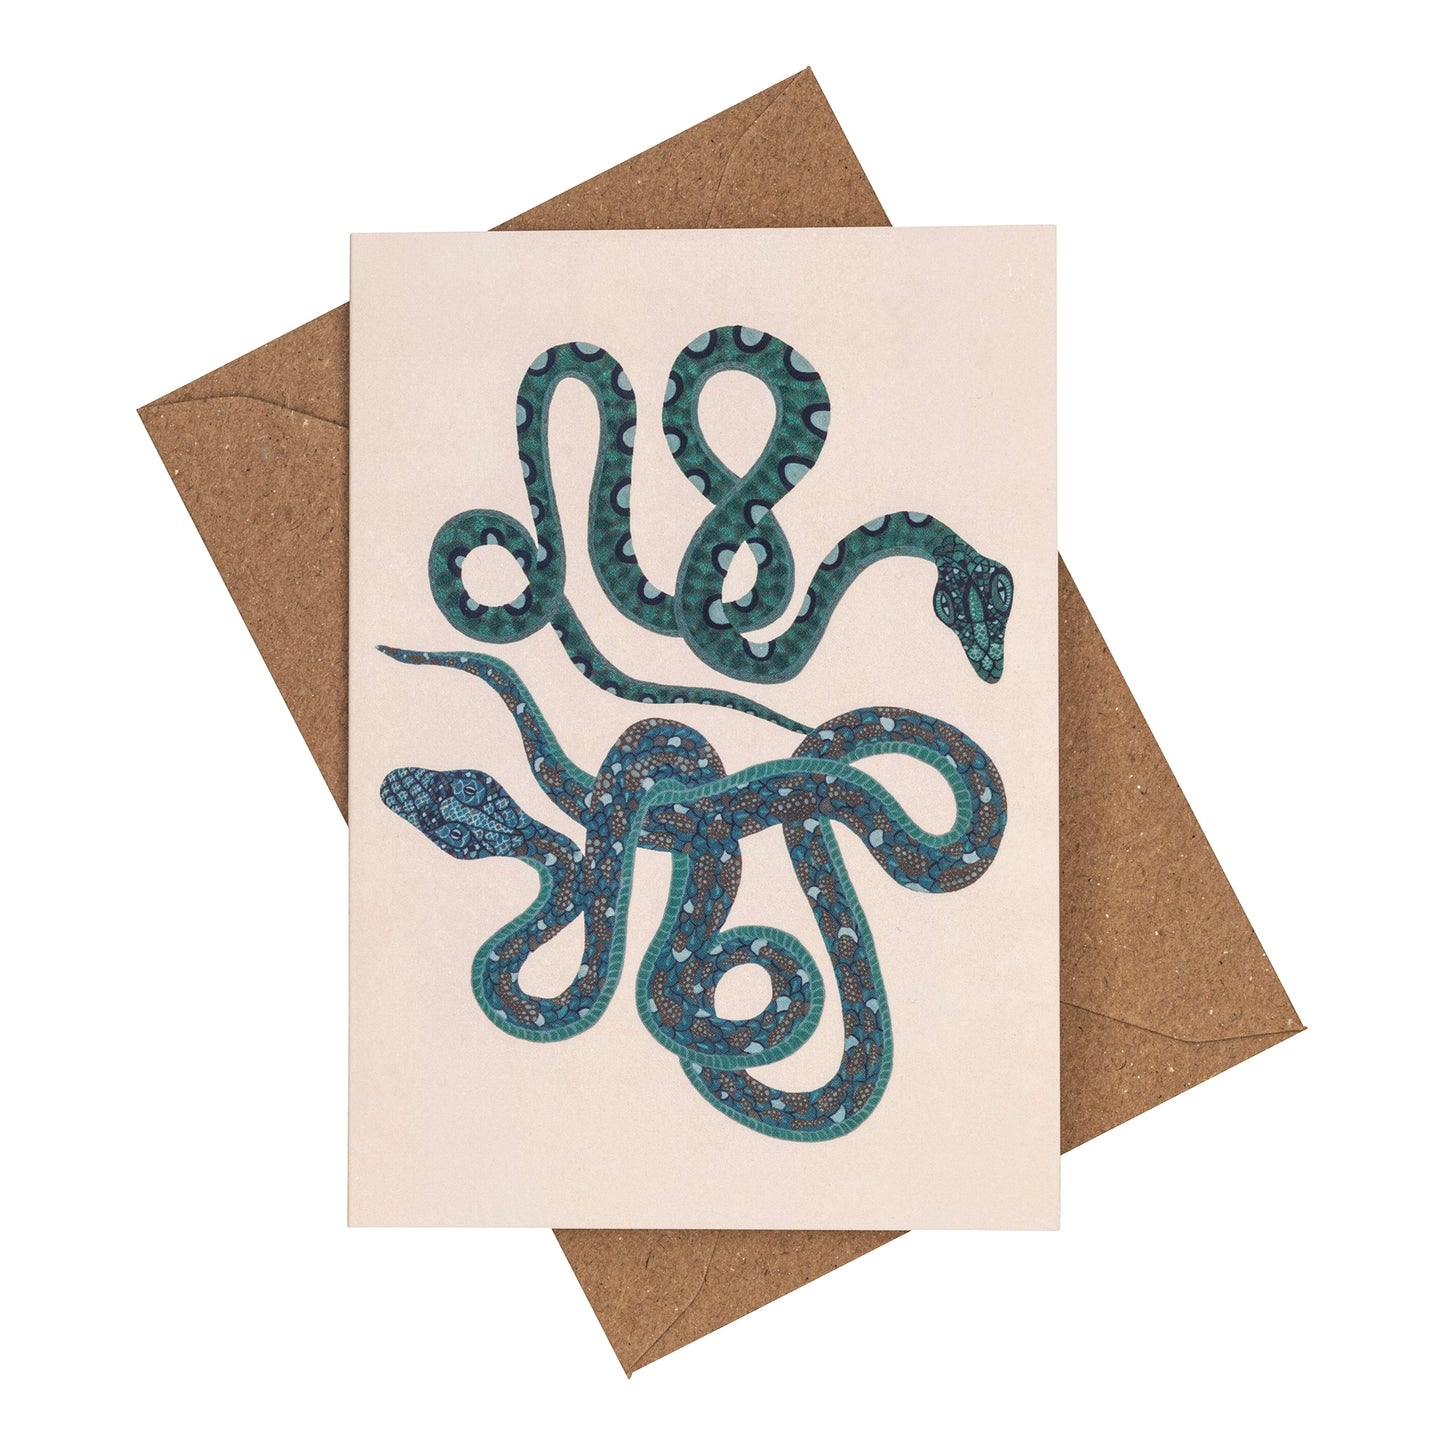 Two Serpents Greeting Card.